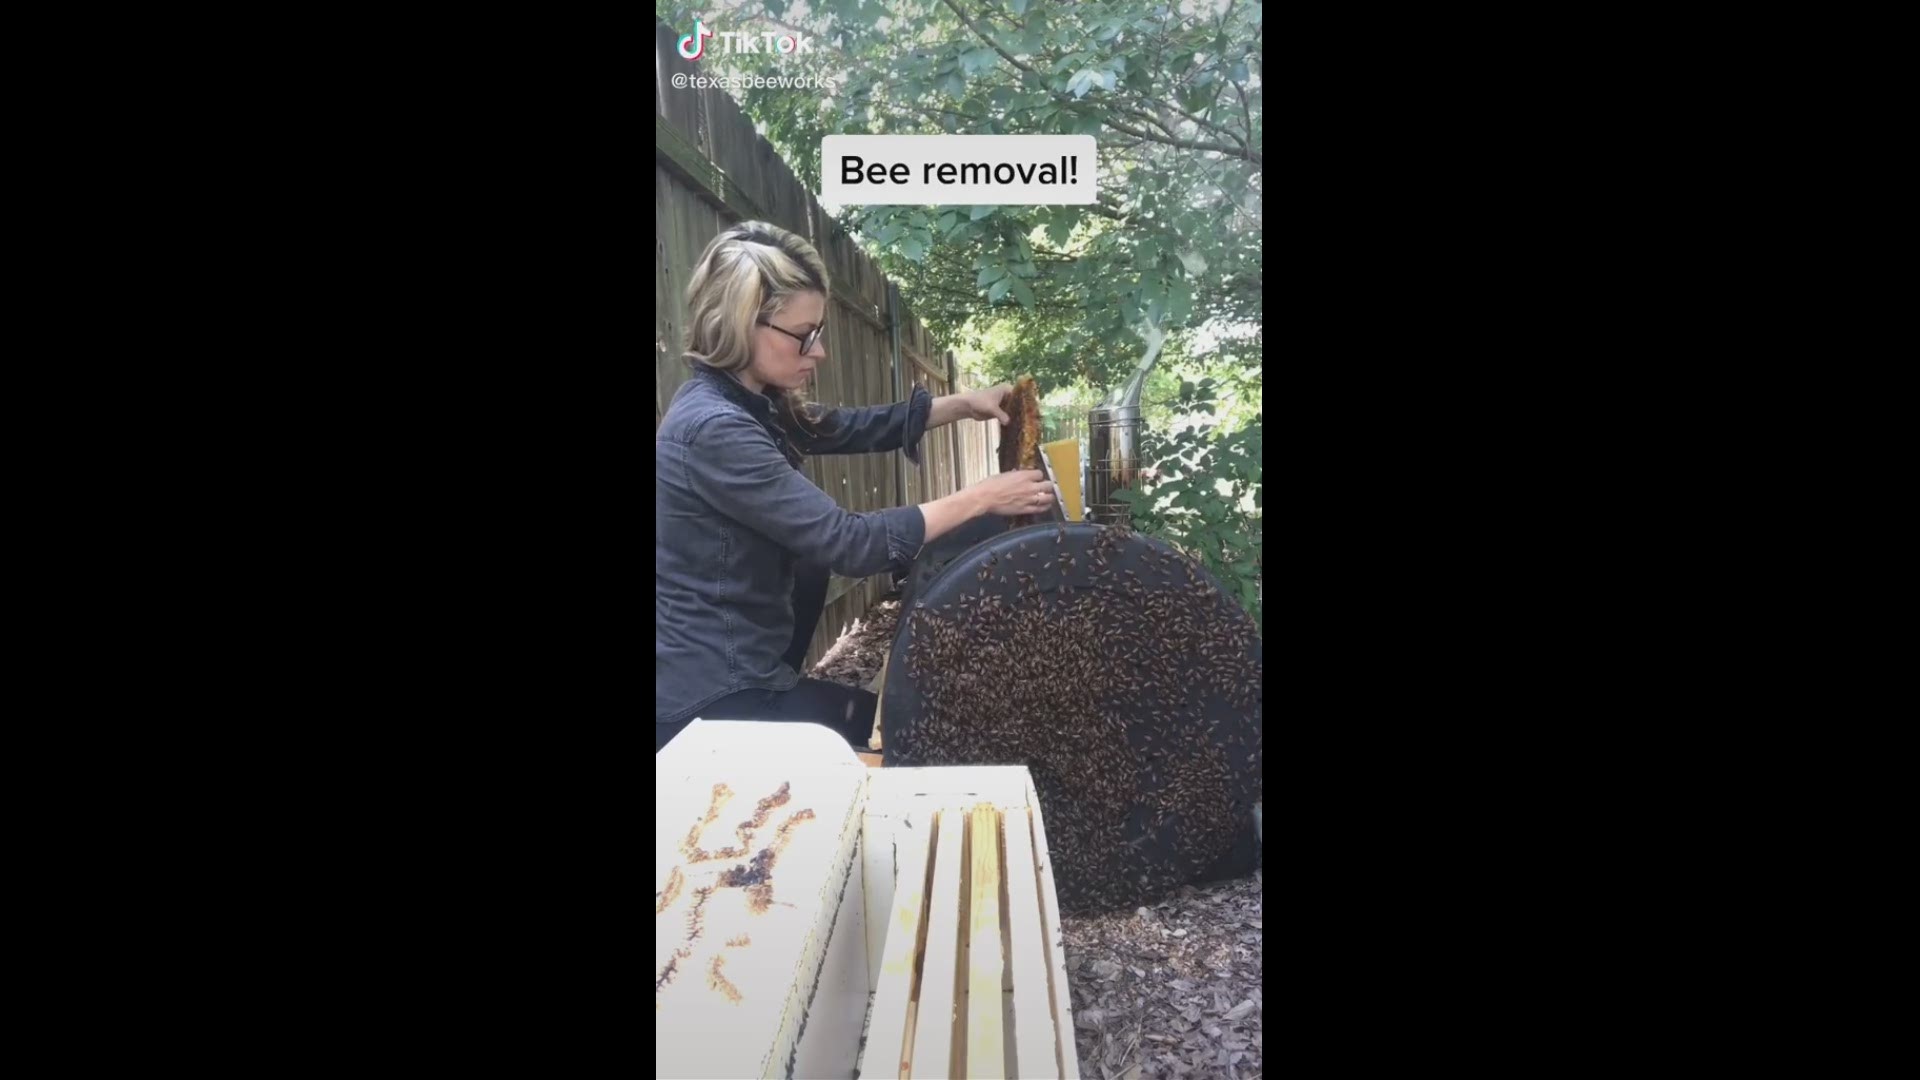 Erika Thompson created some buzz after she shared on TikTok how she safely removes bees in Austin. She is the owner of Texas Beeworks. (Credit: @Texasbeeworks)